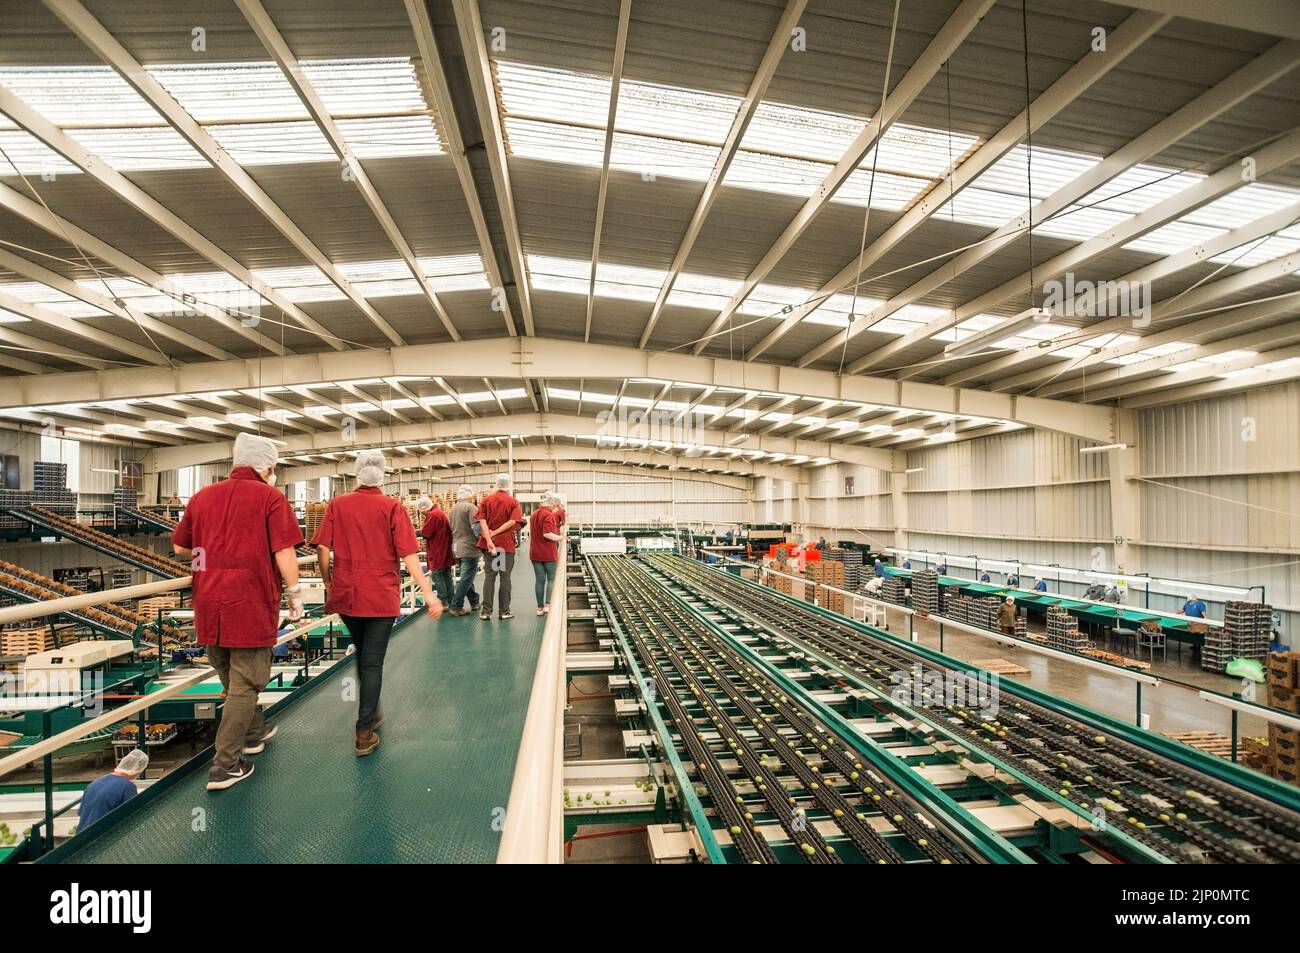 apple factory, quality control corridor, automatic conveyors moving the apples quality, industrial building Stock Photo